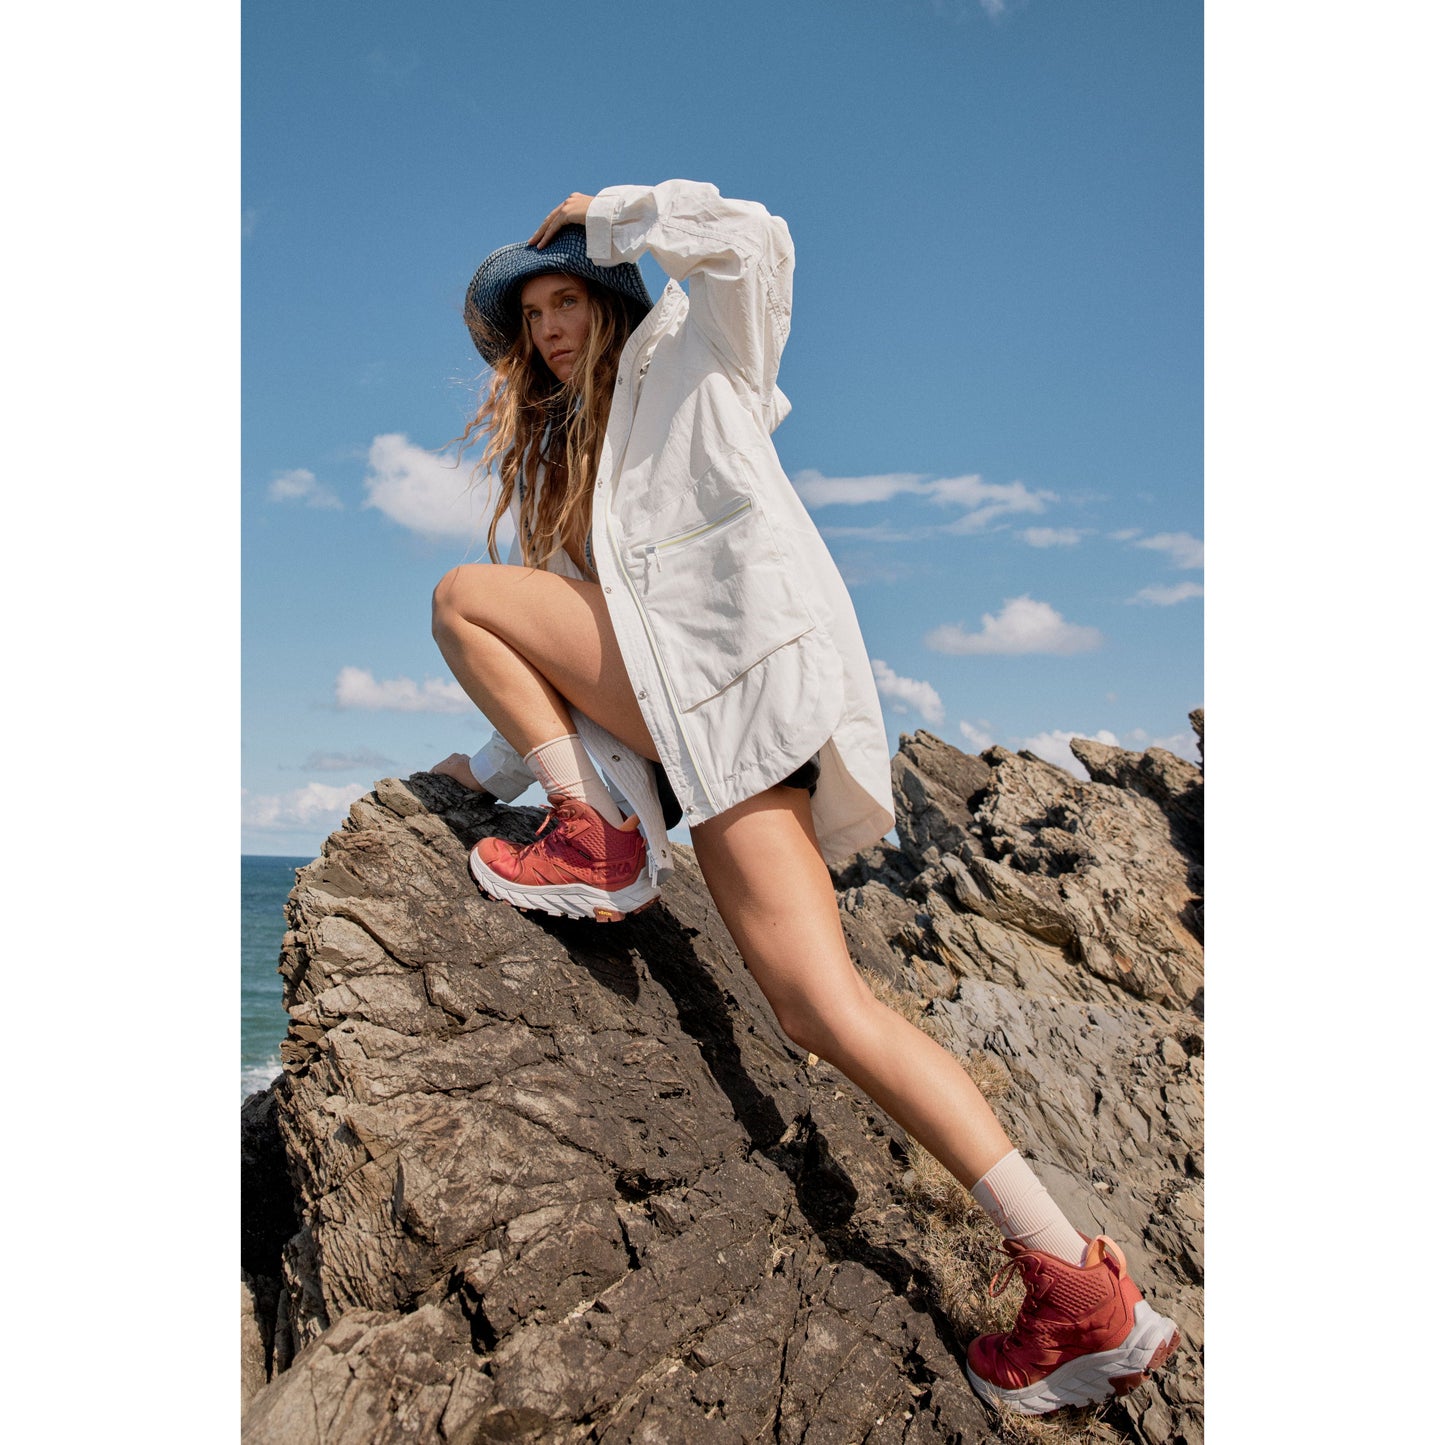 Woman in a Singin in the Rain Jacket, Painted White and red shoes posing on a rocky seaside cliff under a clear blue sky.